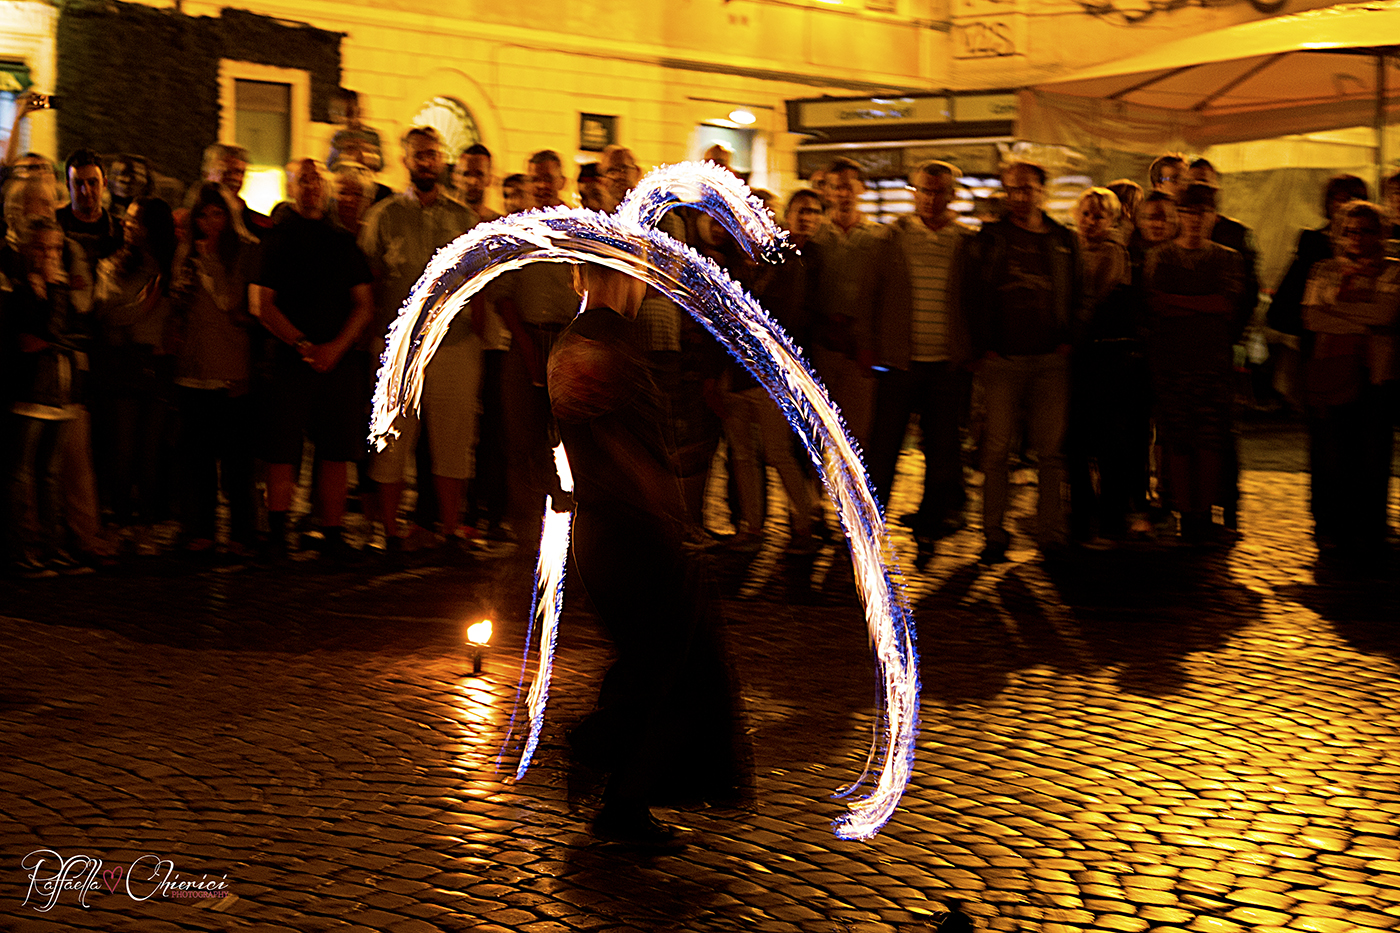 playing with fire in Trastevere...